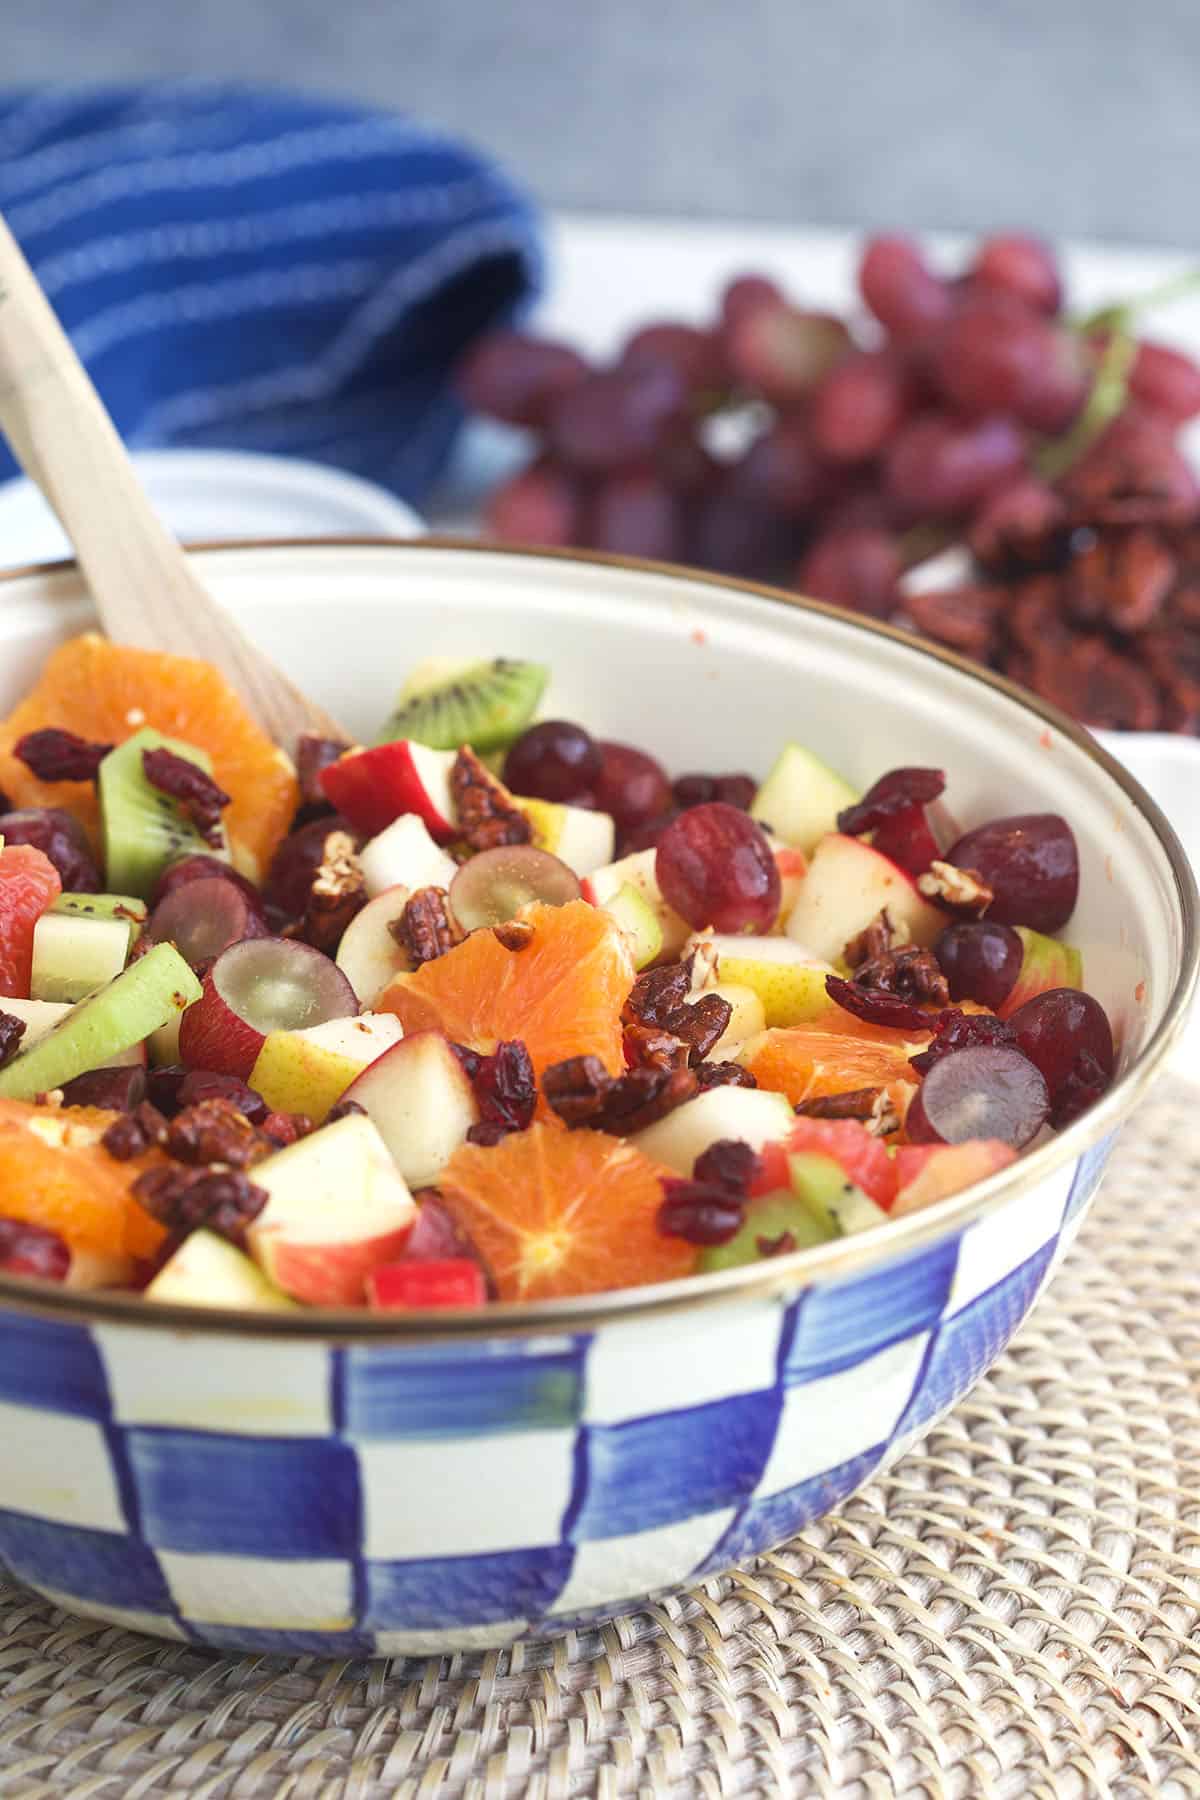 Fruit salad is in a blue and white checkered bowl. 